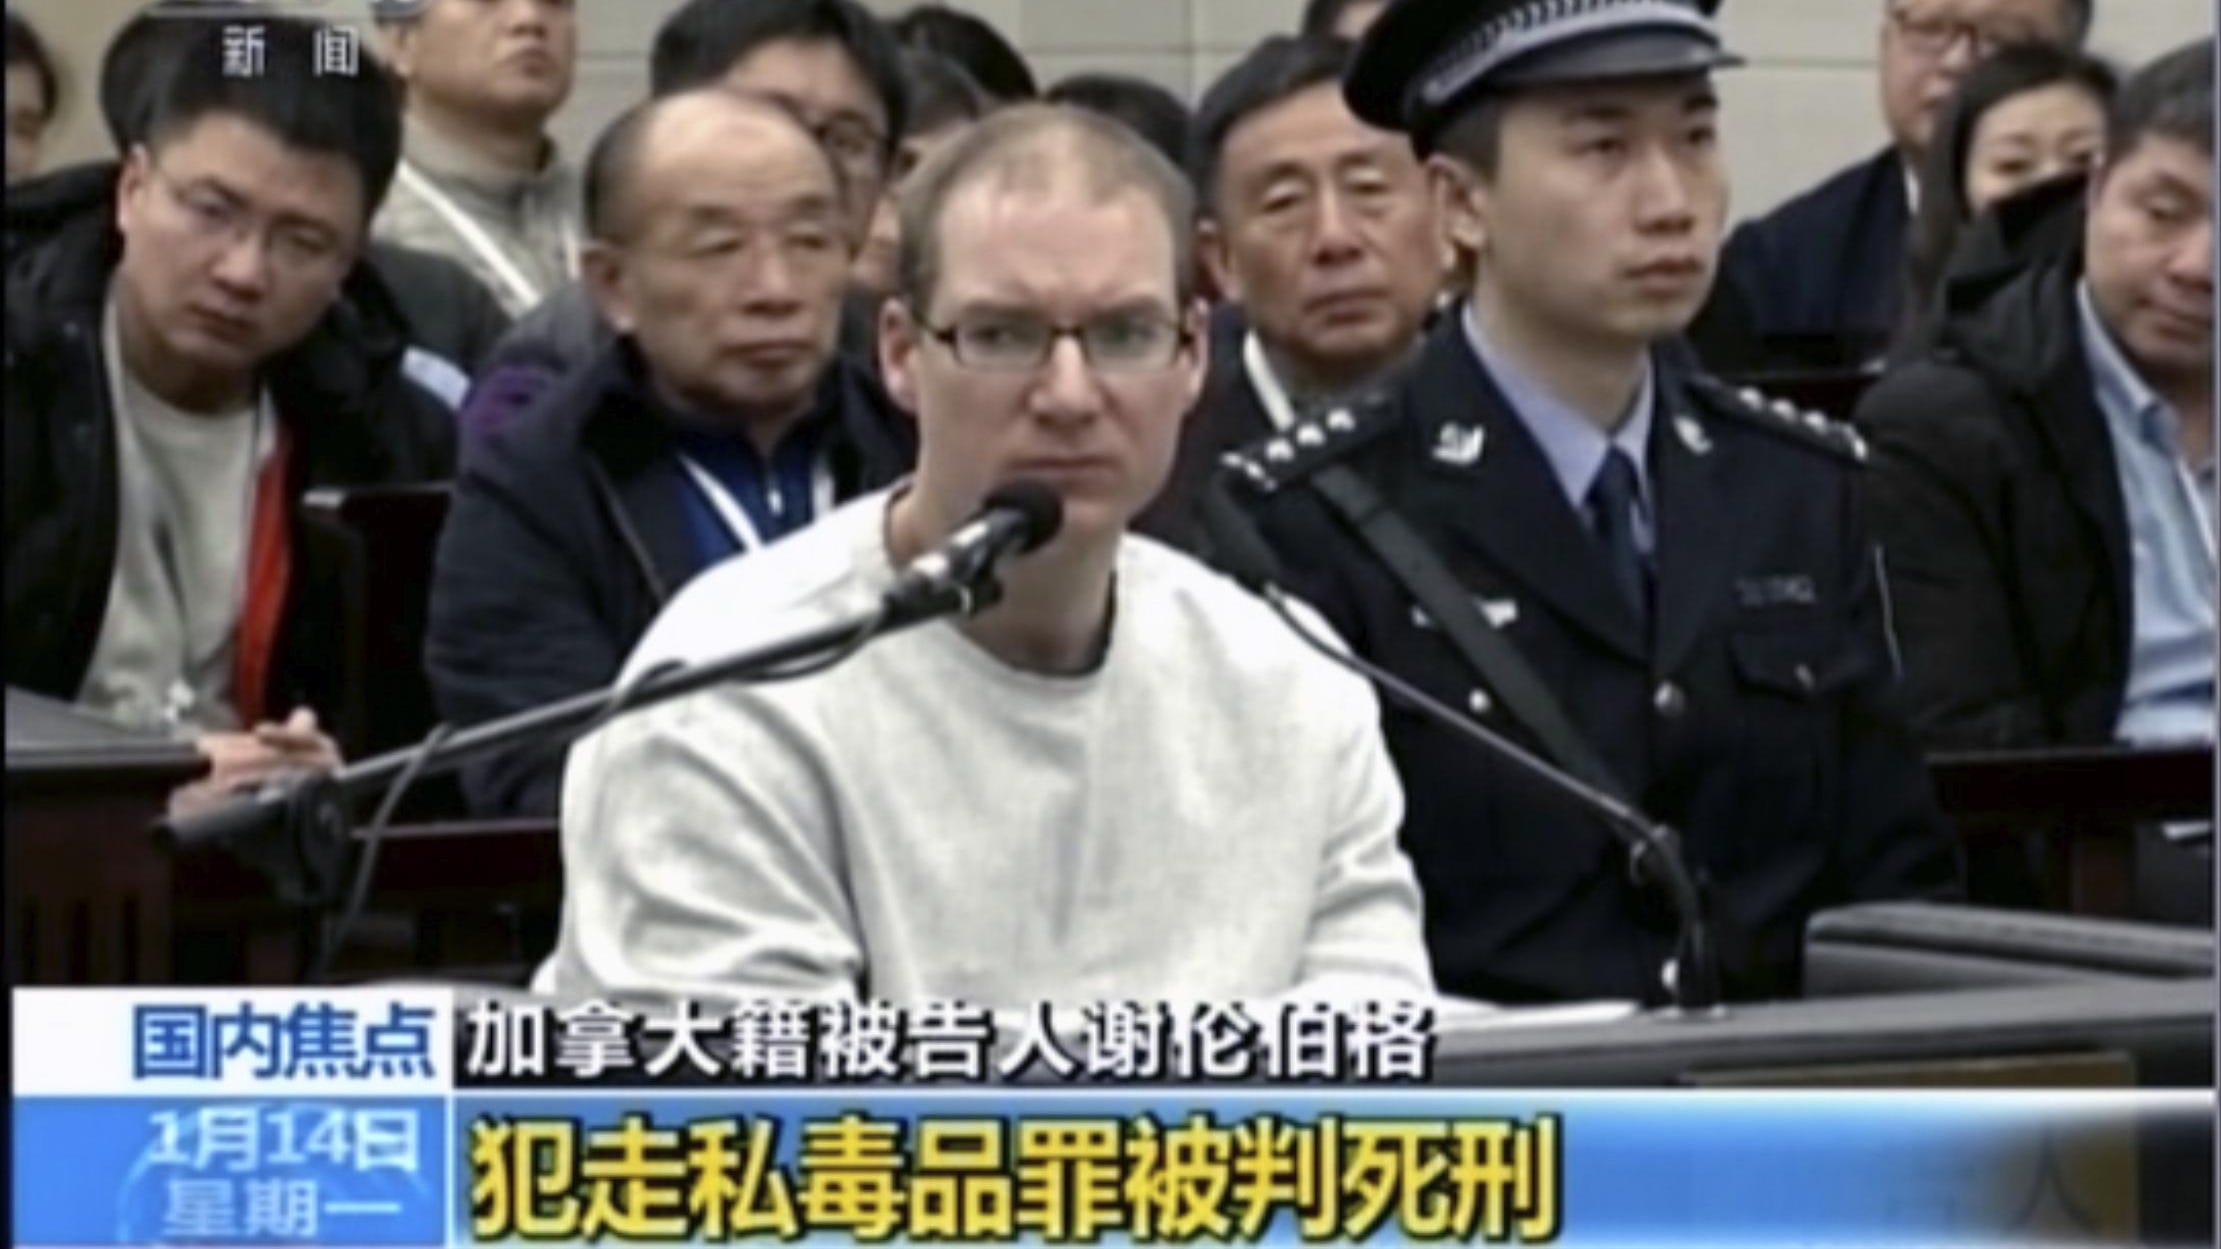 In this image taken from a video footage run by China's CCTV, Canadian Robert Lloyd Schellenberg attends his retrial at the Dalian Intermediate People's Court in Dalian, northeastern China's Liaoning province on Jan. 14, 2019. A Chinese court sentenced the Canadian man to death Monday in a sudden retrial in a drug smuggling case that is likely to escalate tensions between the countries over the arrest of a top Chinese technology executive.